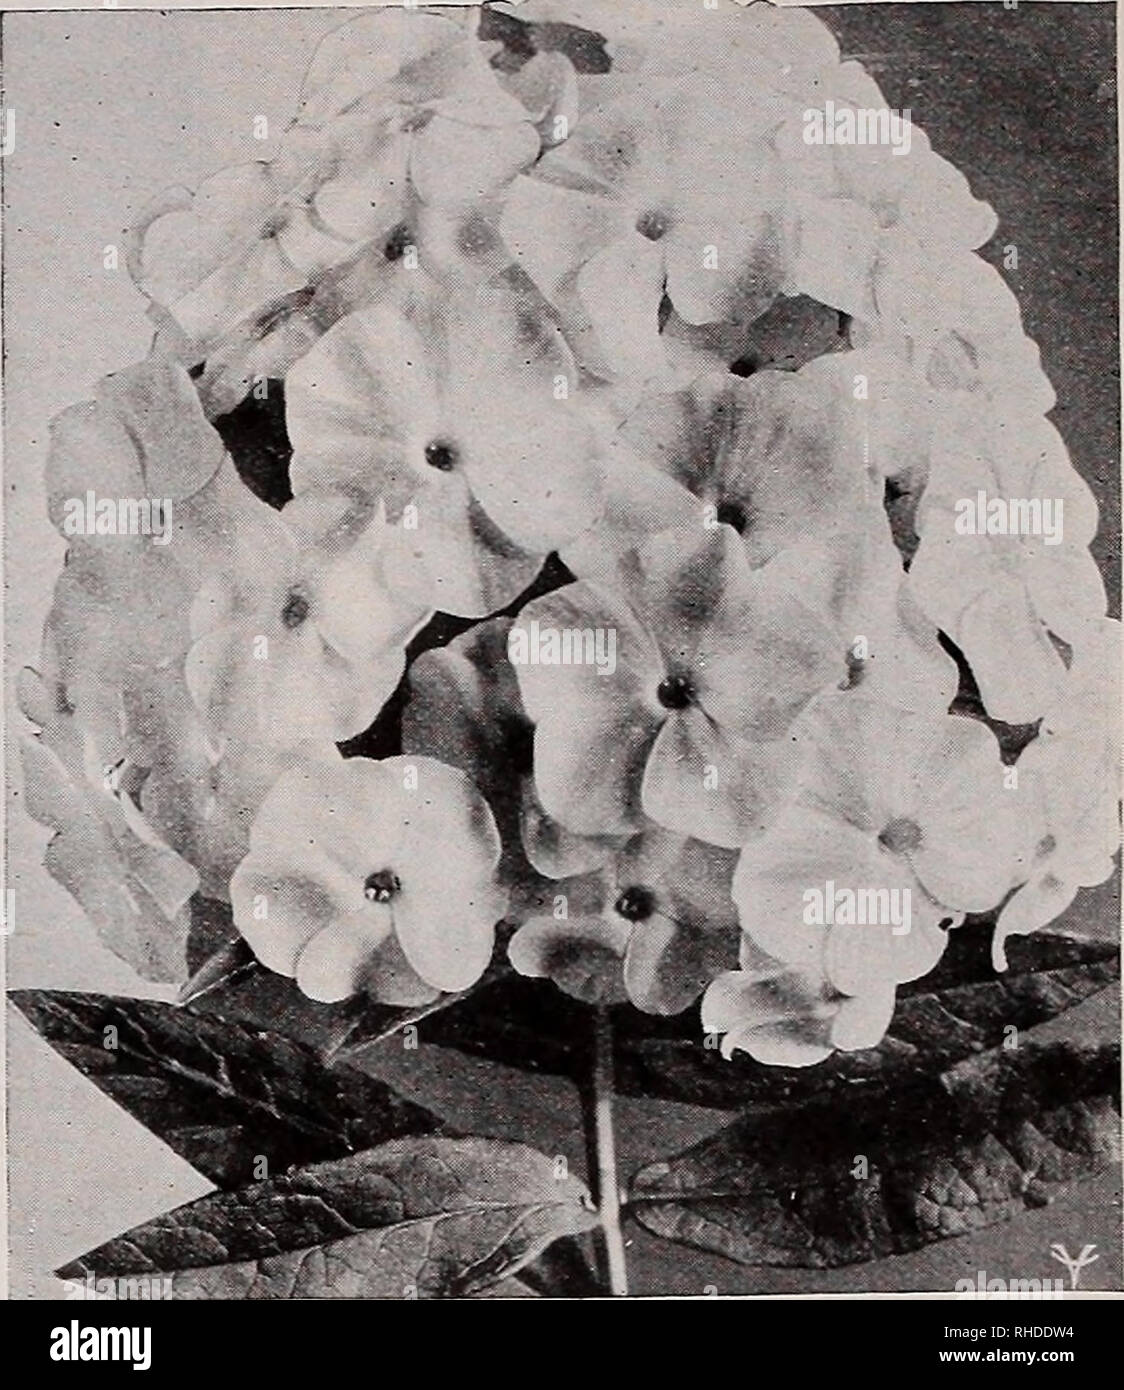 . Book for florists. Flowers Seeds Catalogs; Bulbs (Plants) Seedlings Catalogs; Vegetables Seeds Catalogs; Trees Seeds Catalogs; Horticulture Equipment and supplies Catalogs. 48 VAUGHAN'S SEED STORE, CHICAGO AND NEW YORK, BOOK FOR FLORISTS Hardy Perennial Plants —(Continued) PRIMULA. (Primrose.') 10 Acaulis Lilacina, Fl. PI. X. Double lavender. 6in. April-May.$3.00 Veris. X. Mixed colors. 6 in. April-May 1.50 PYRETHRUM Roseum. (Painted Daisy.) Single. Mixed colors. 2 ft. May-June 85 James Kelway. Red. 2 ft. May-June 1.25 Uliginosum. White. 3 ft. Aug.-Sept 1.00 RANUNCULUS Repens. X- Double yell Stock Photo